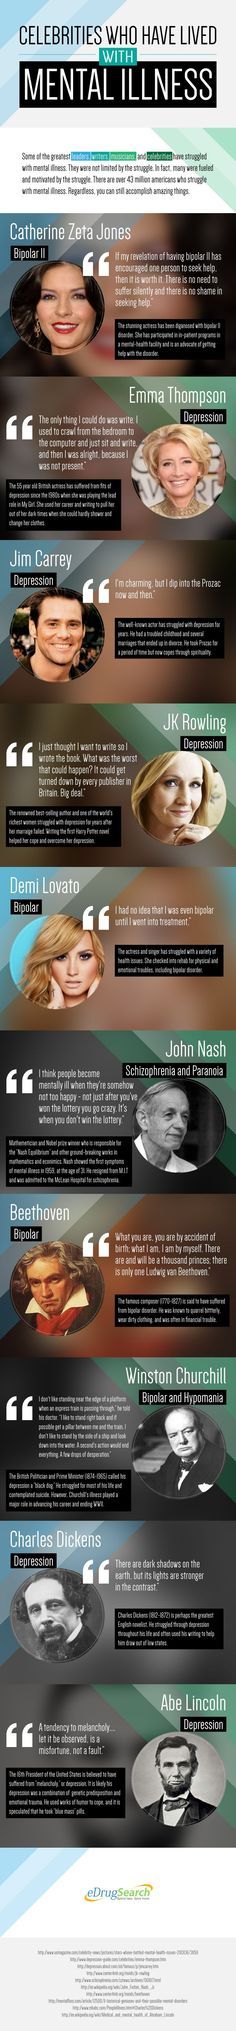 1566666554_209_Psychology-Infographic-Celebrities-Who-Have-Lived-With-Mental-Illness Psychology Infographic : Celebrities Who Have Lived With Mental Illness #infographic